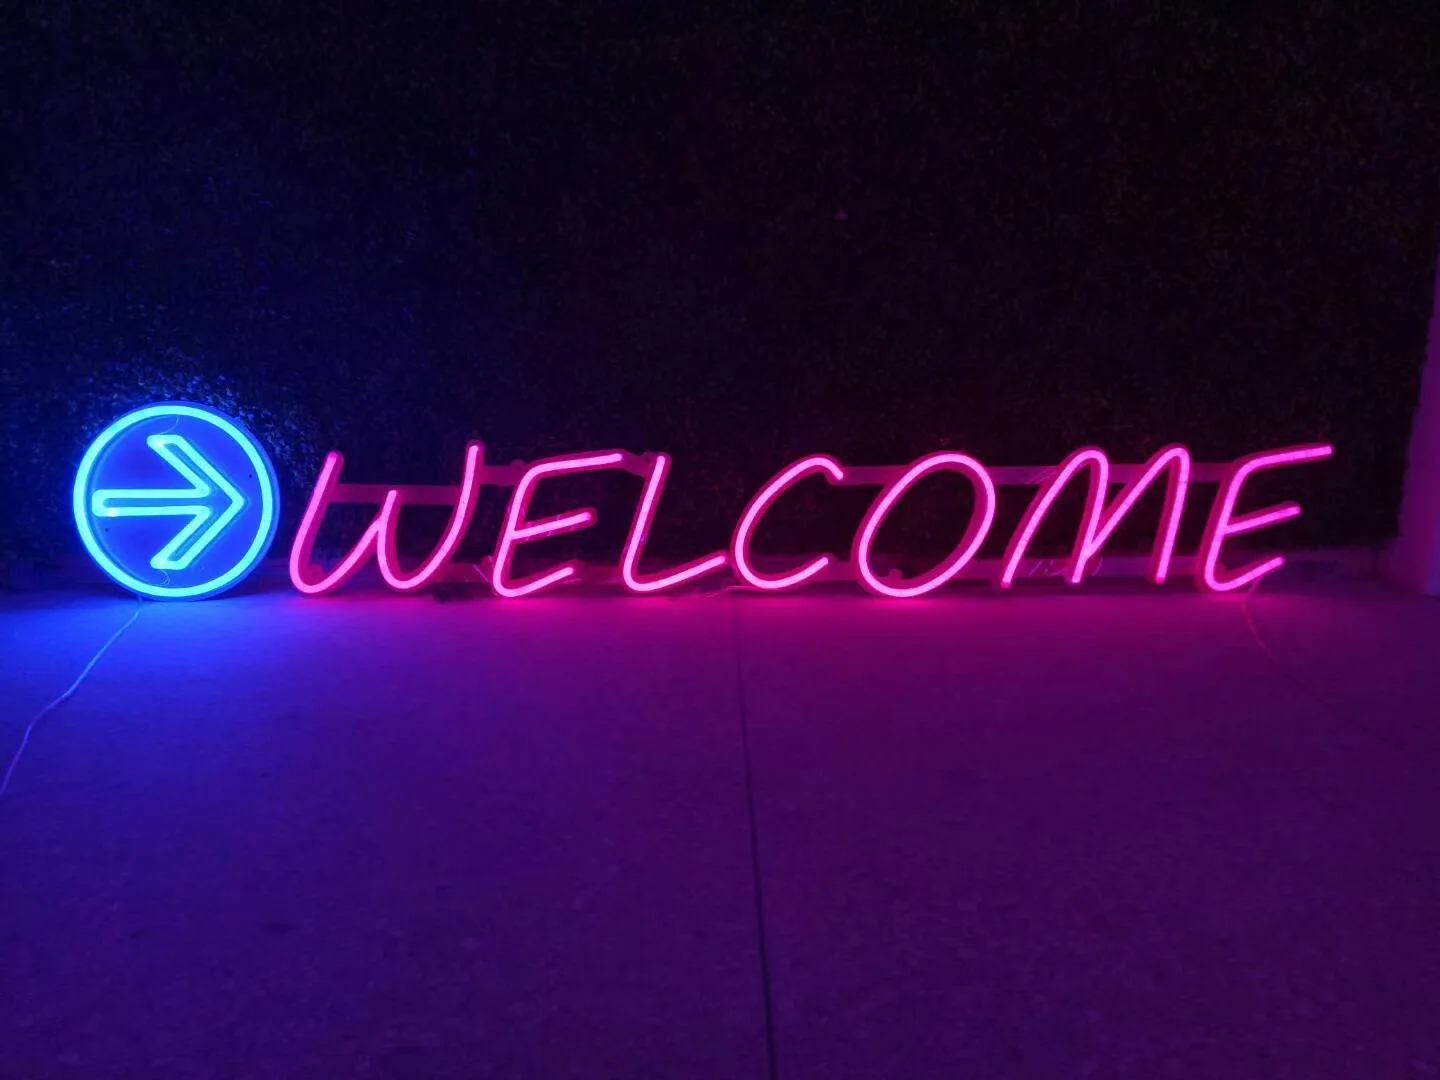 100% Unbreakable LED Flexible Neon Sign 12V for Coffee Bar Night Club and Restaurant